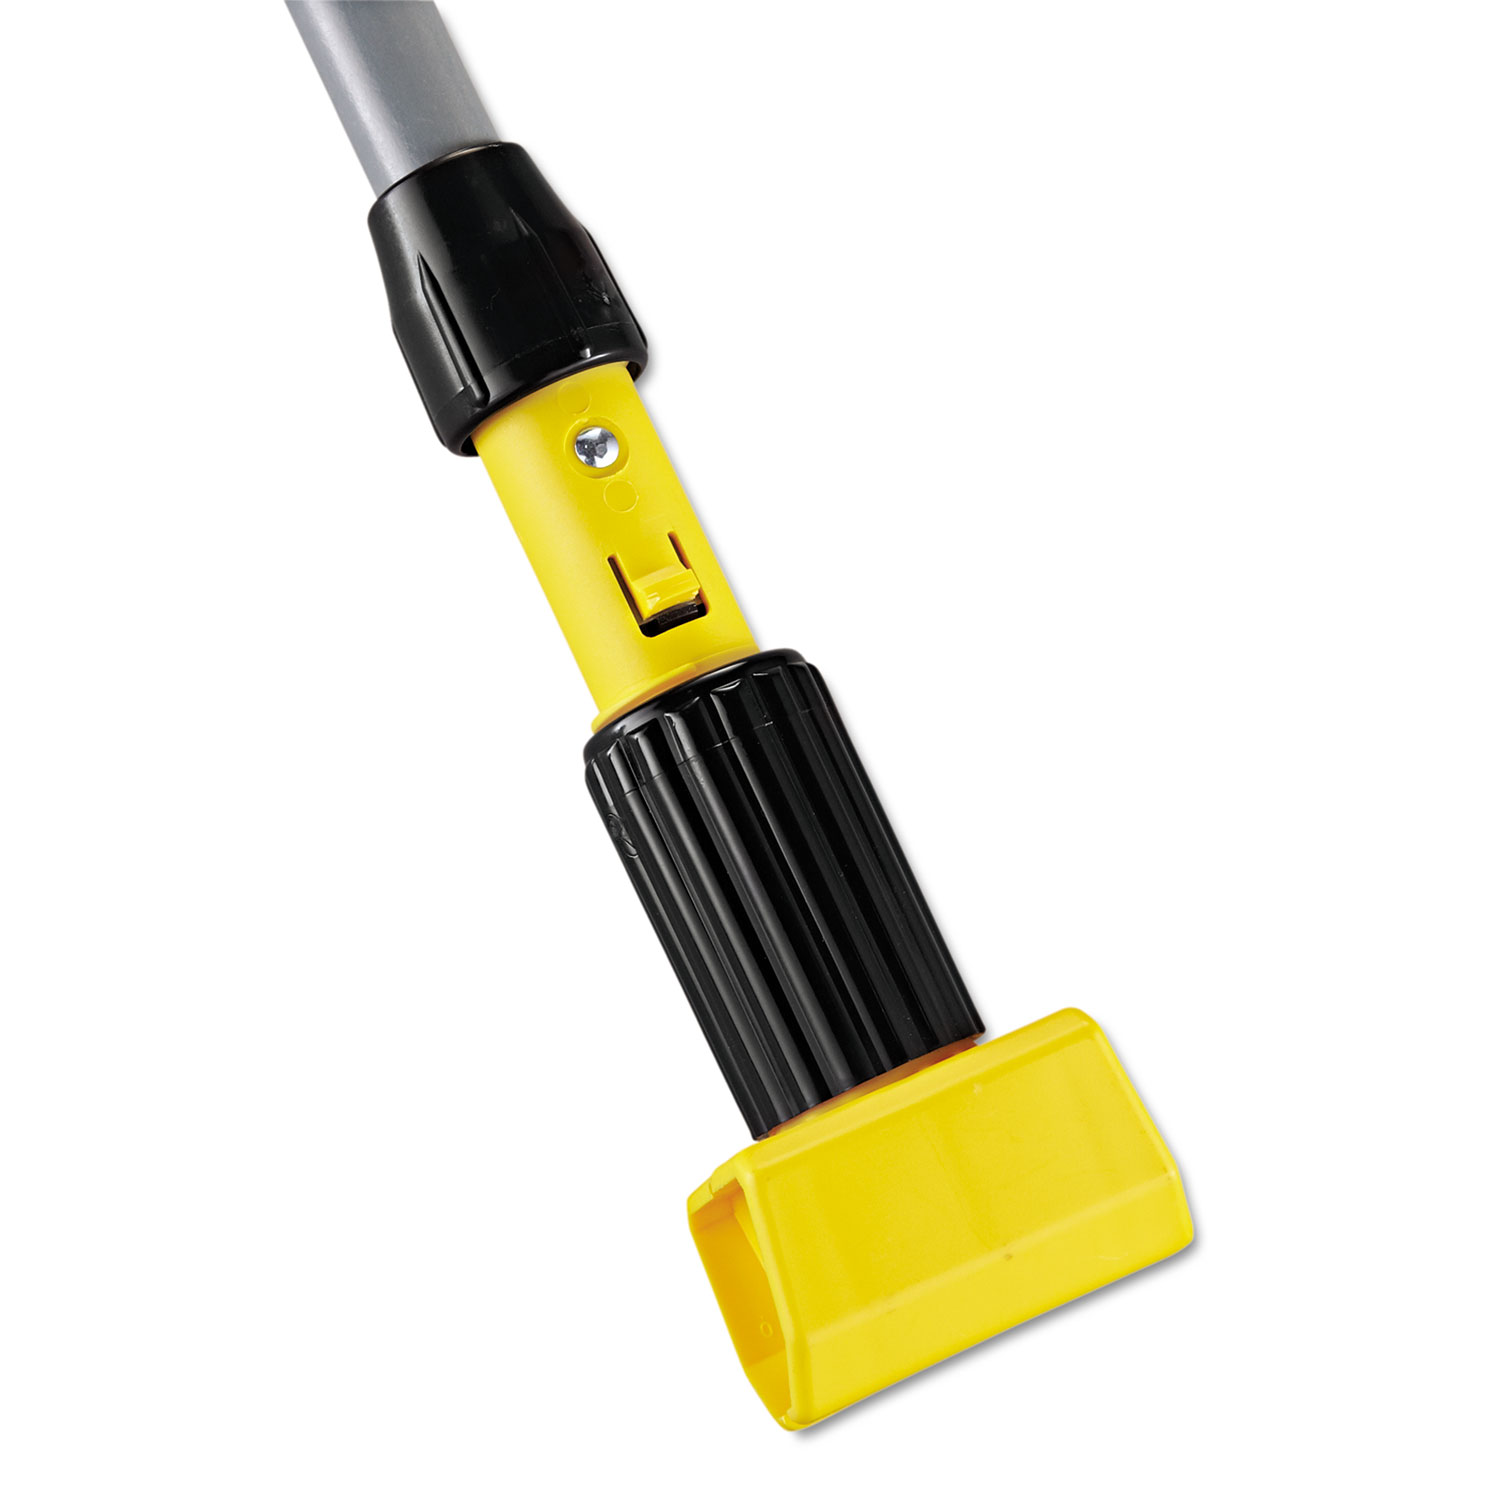 Rubbermaid Flow Finishing System, 56 Handle, 18 Mop Head, Yellow